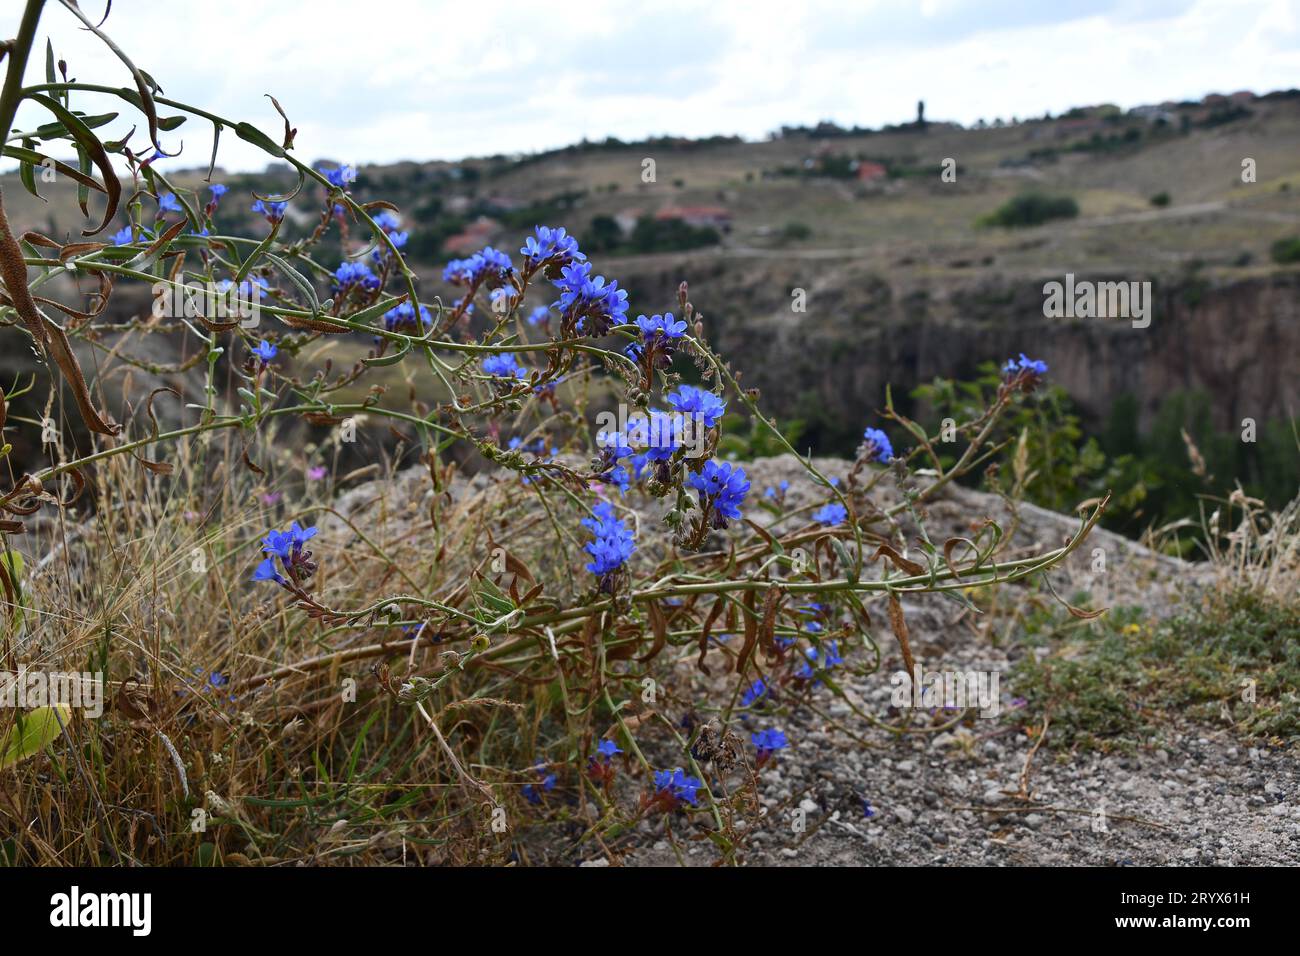 View of the blue wild flowers on the edge of the cliff of the Ihlara valley in Aksaray, Turkey Stock Photo